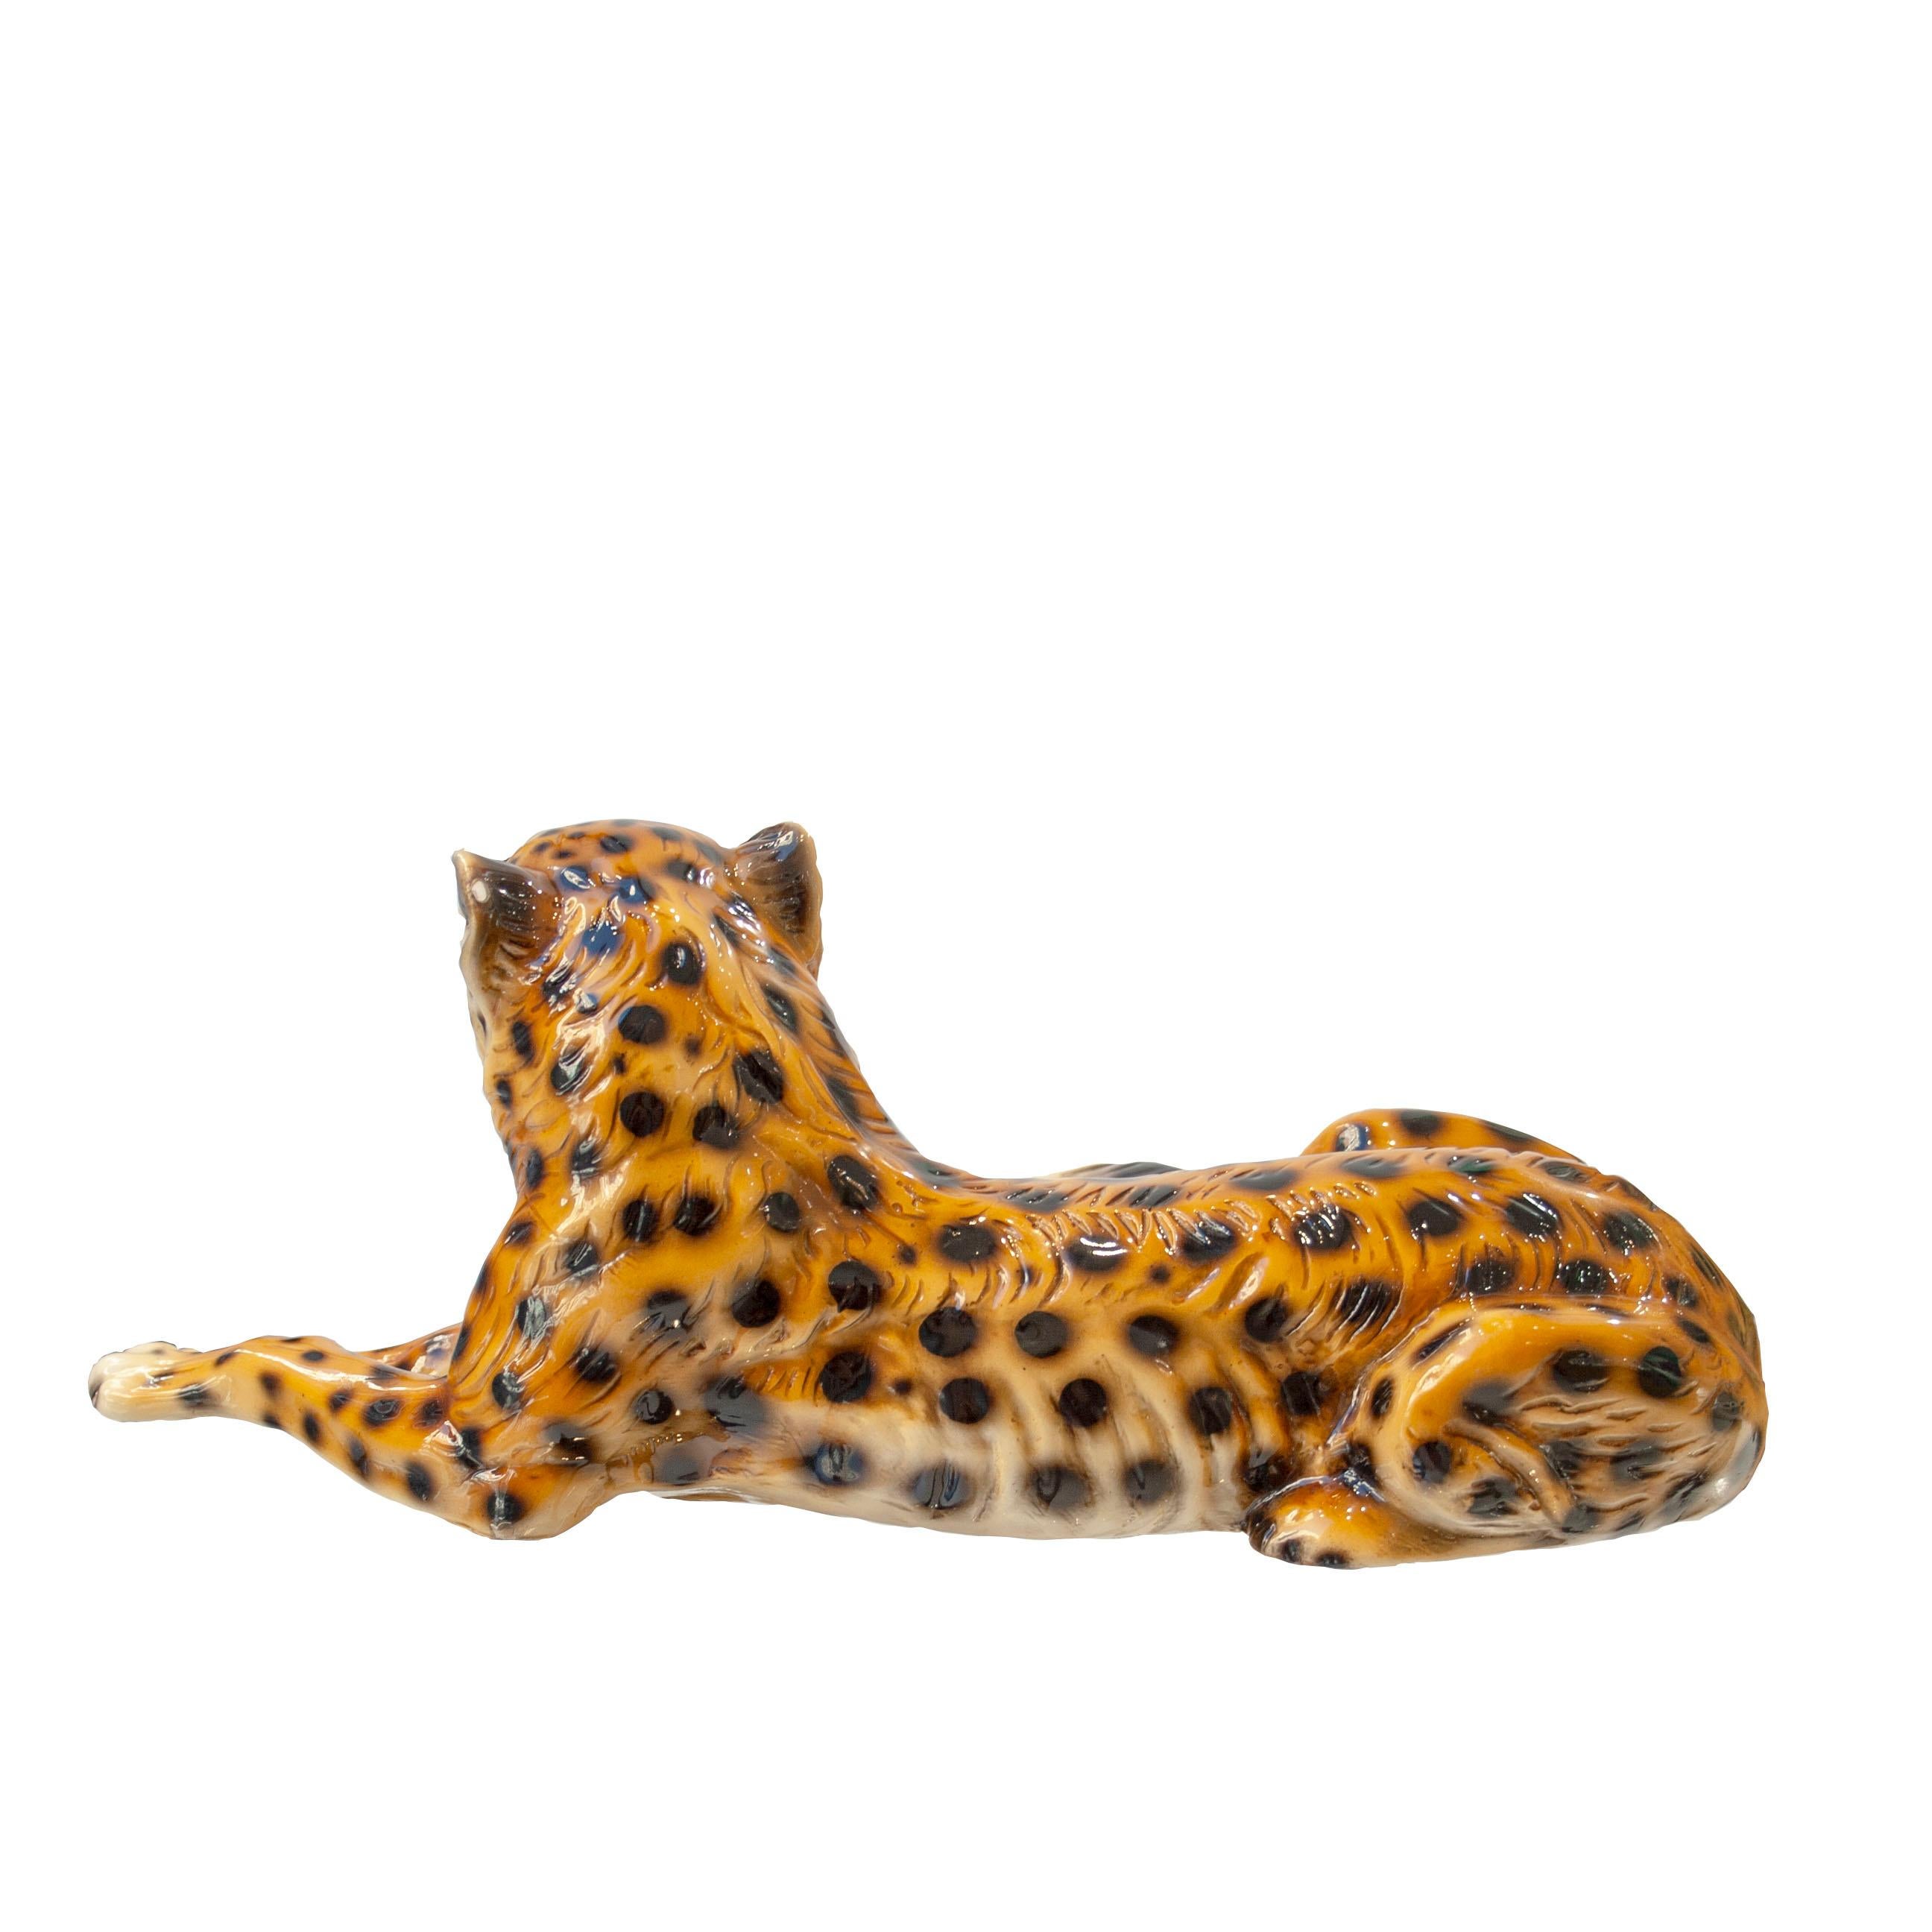 Hand-painted leopard sculpture made of porcelain, 1970.  
